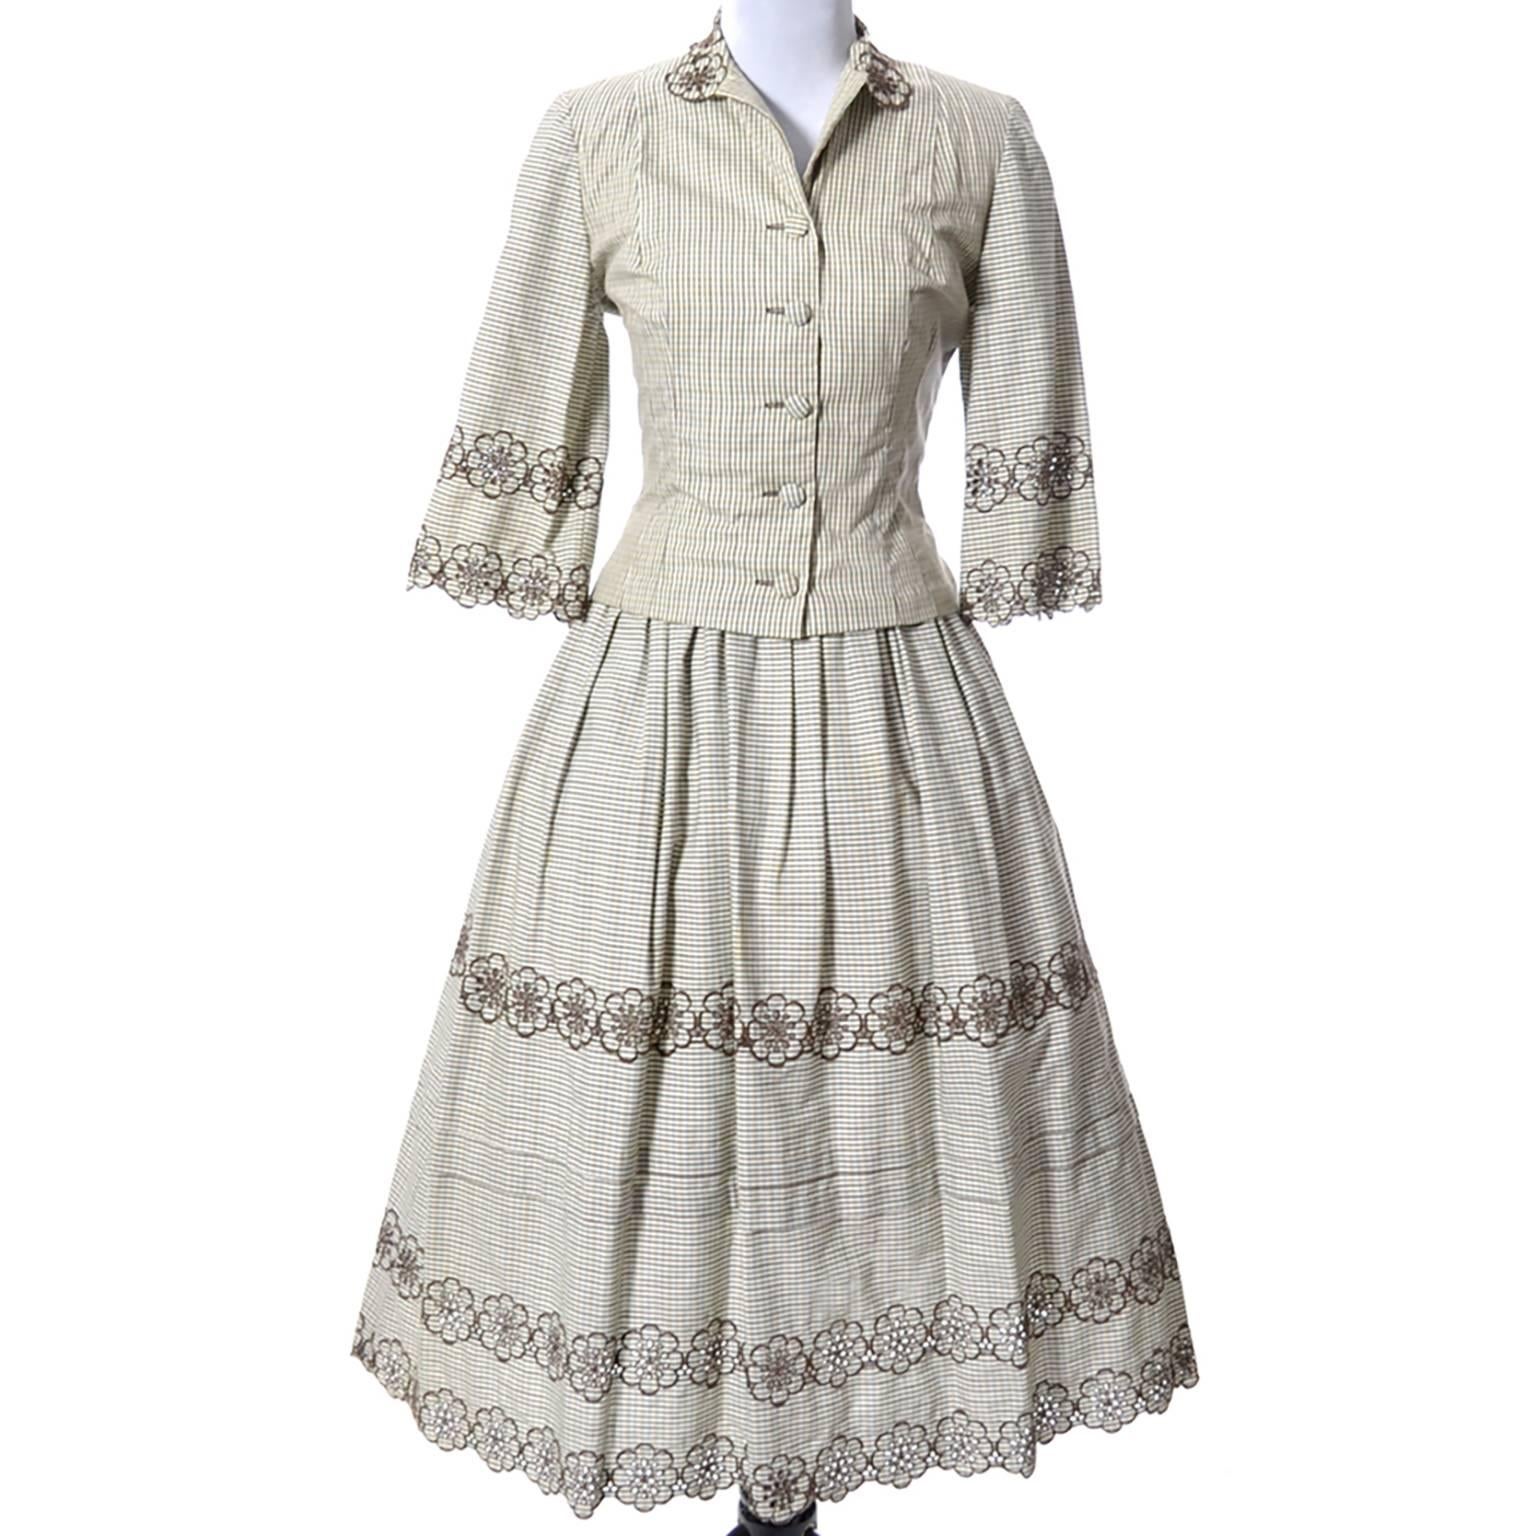 This is an absolutely wonderful 2 piece 1950s vintage dress from designer Tina Leser. This ensemble has the 